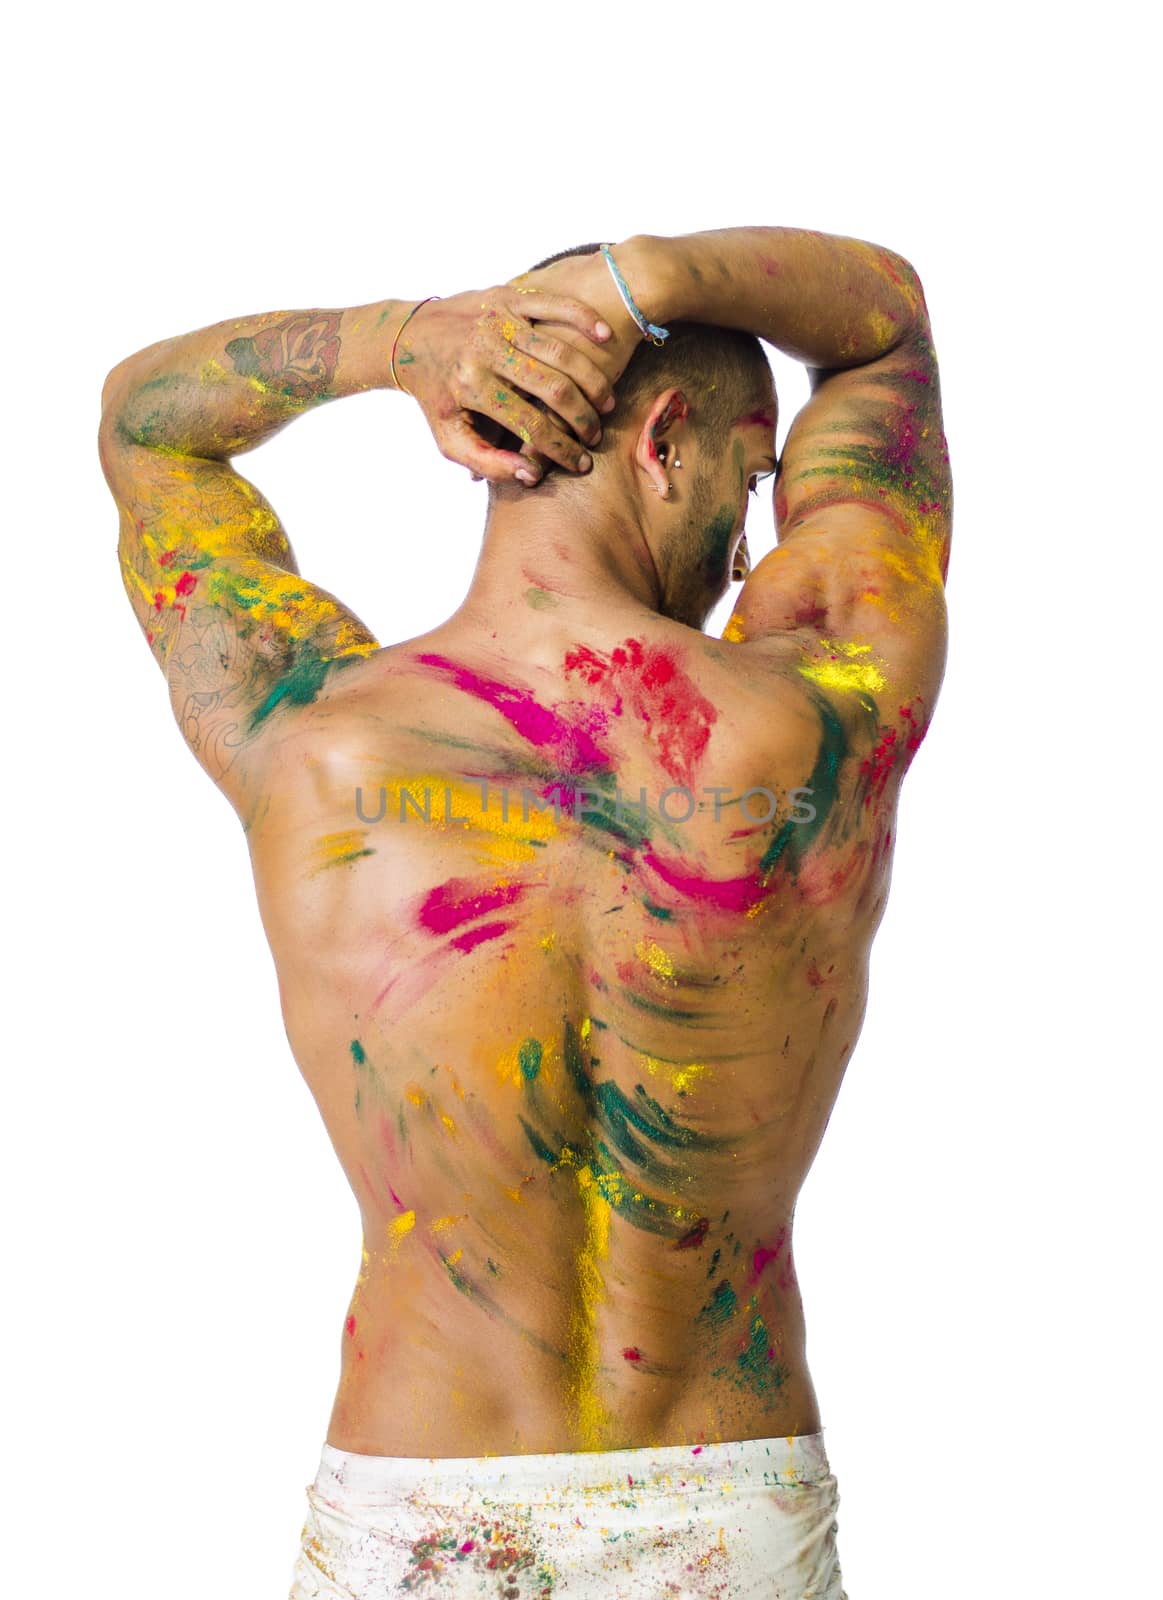 Back of shirtless young man, skin painted all over with bright Holi colors by artofphoto